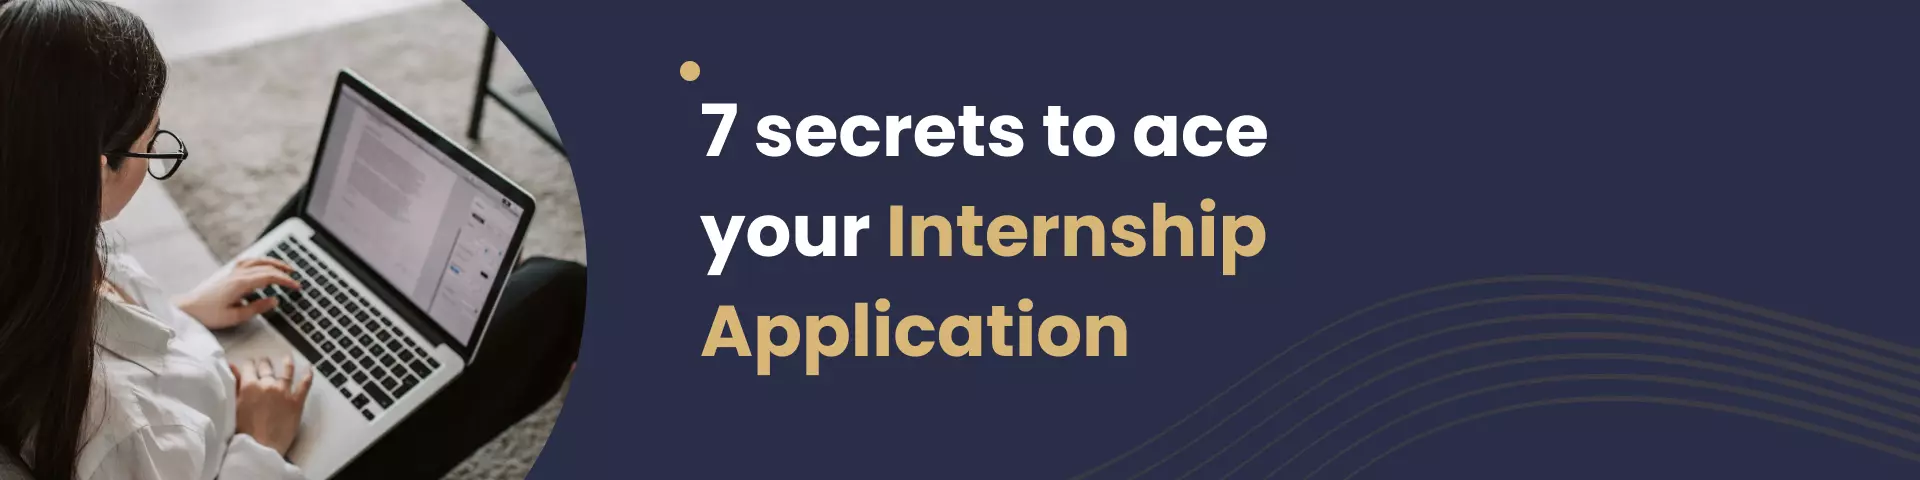 Employers reveal 7 secrets to ace your internship application